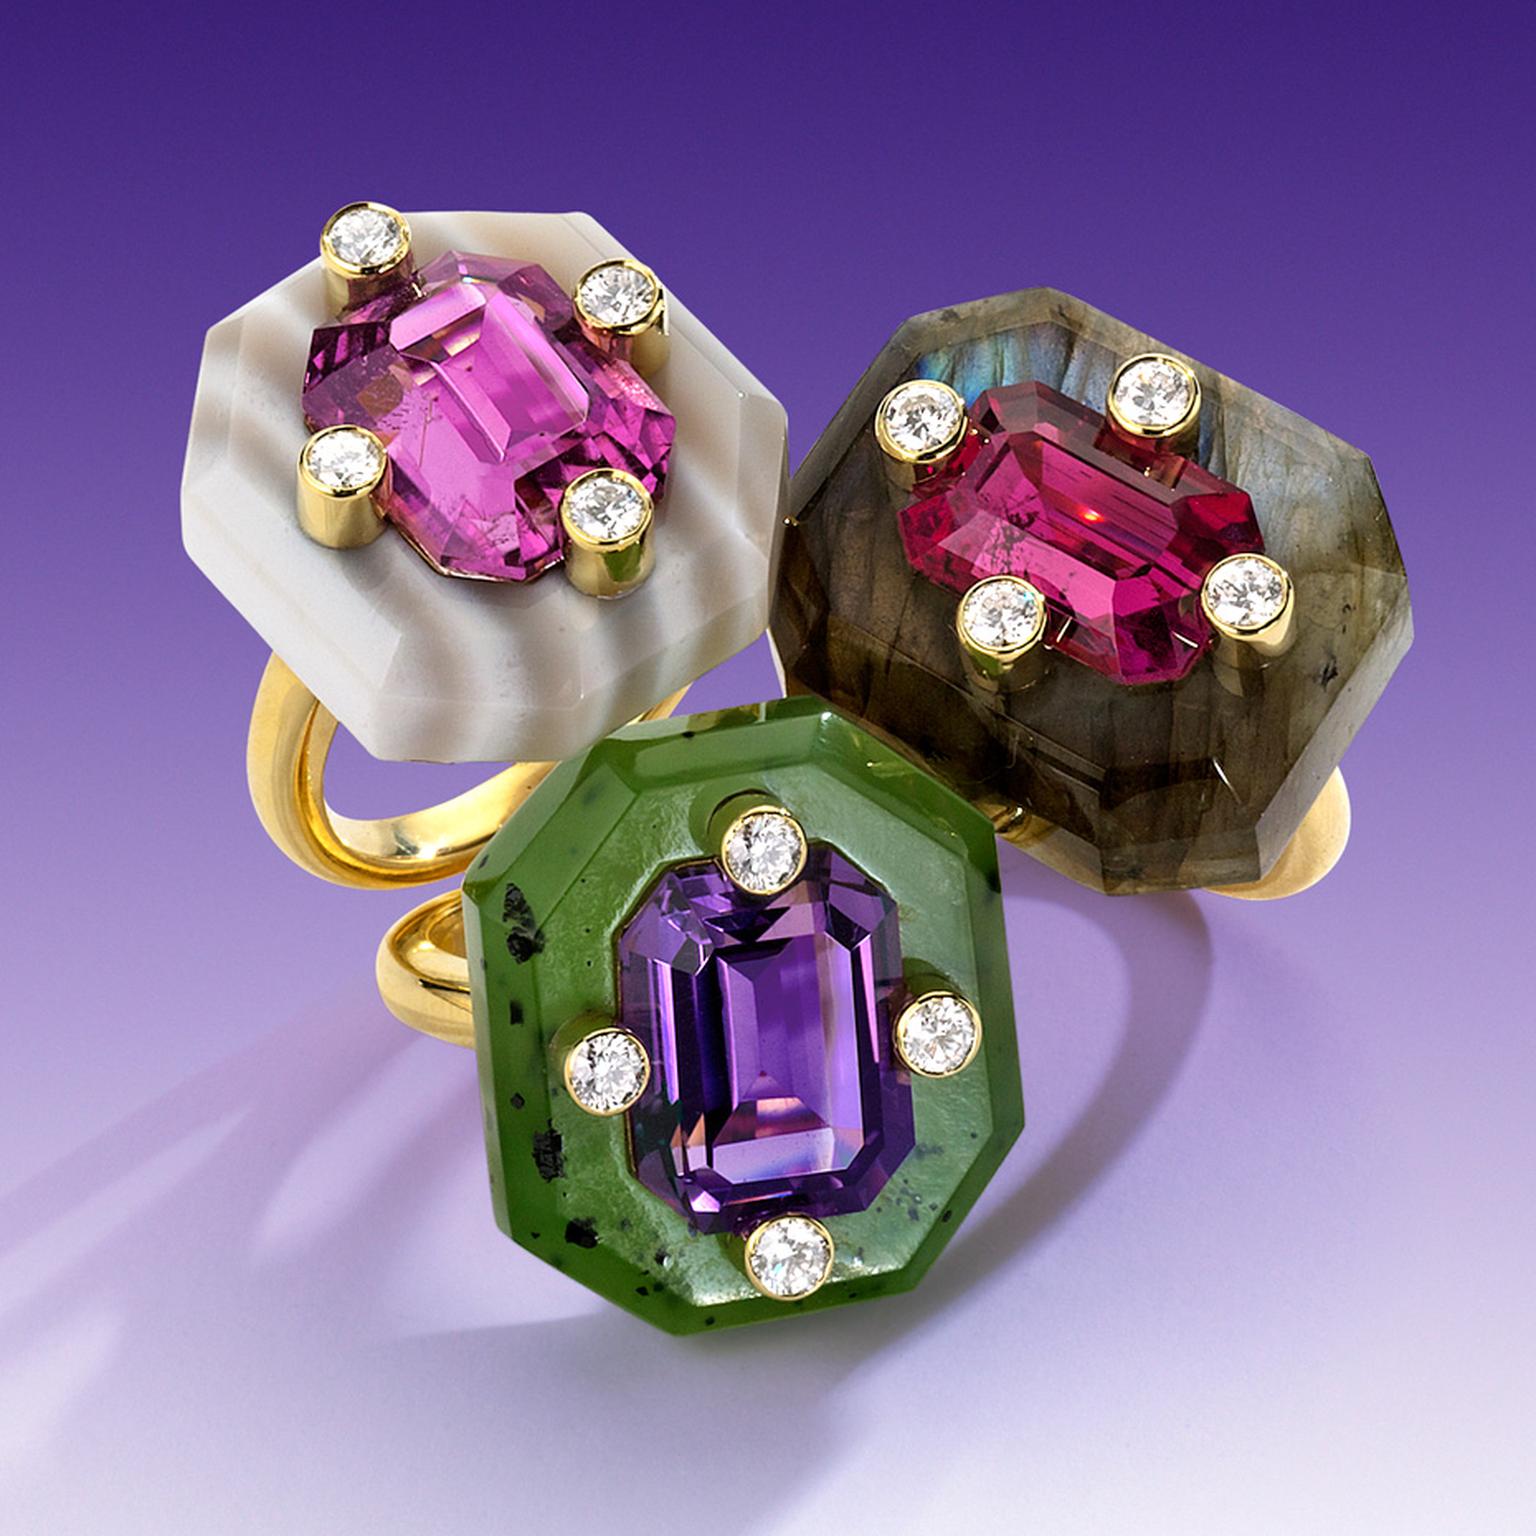 Nicholas Varney 2012 'Duo' gold rings featuring carved labradorite, pink tourmaline and diamond horizontal; carved nephrite jade, amethyst and diamond; and carved striped agate, California pink tourmaline and diamond.